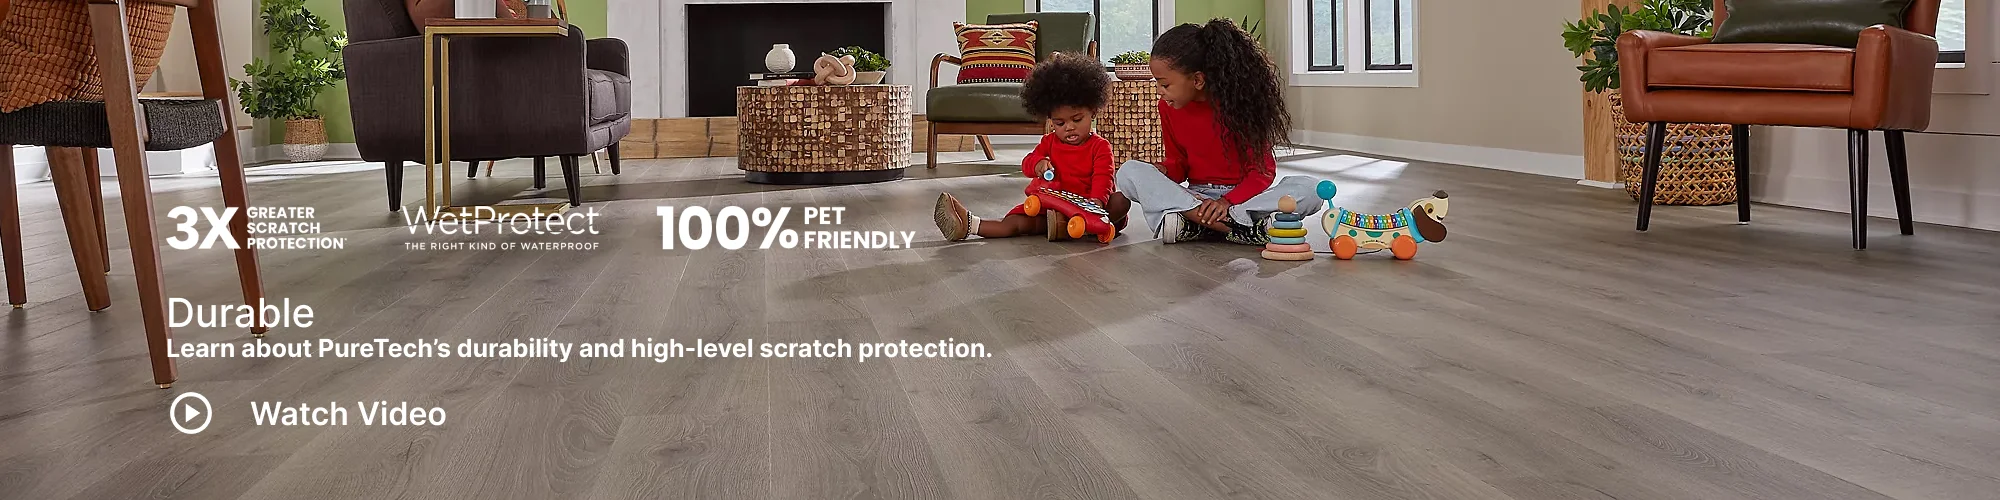 Learn more about durable flooring with PureTech by Mohawk